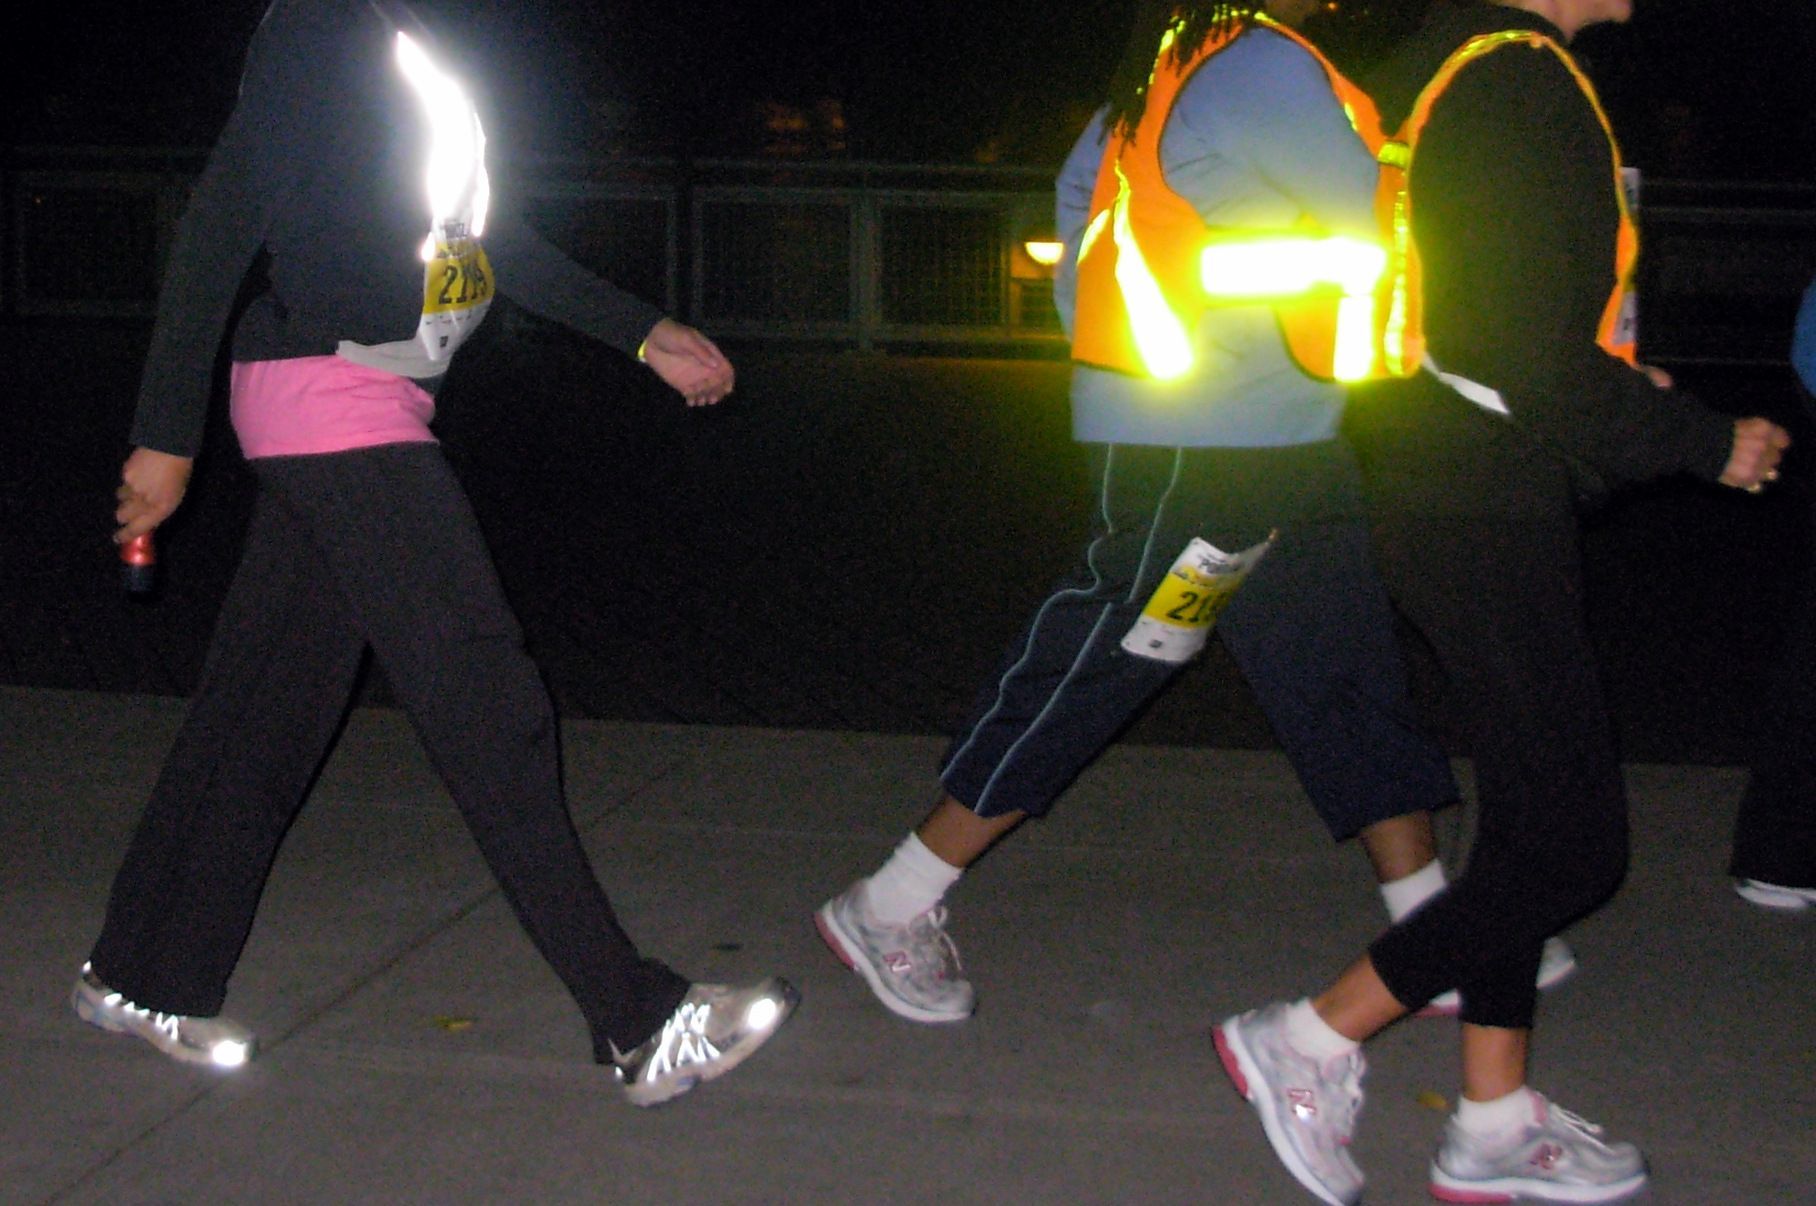 reflective accessories for walkers